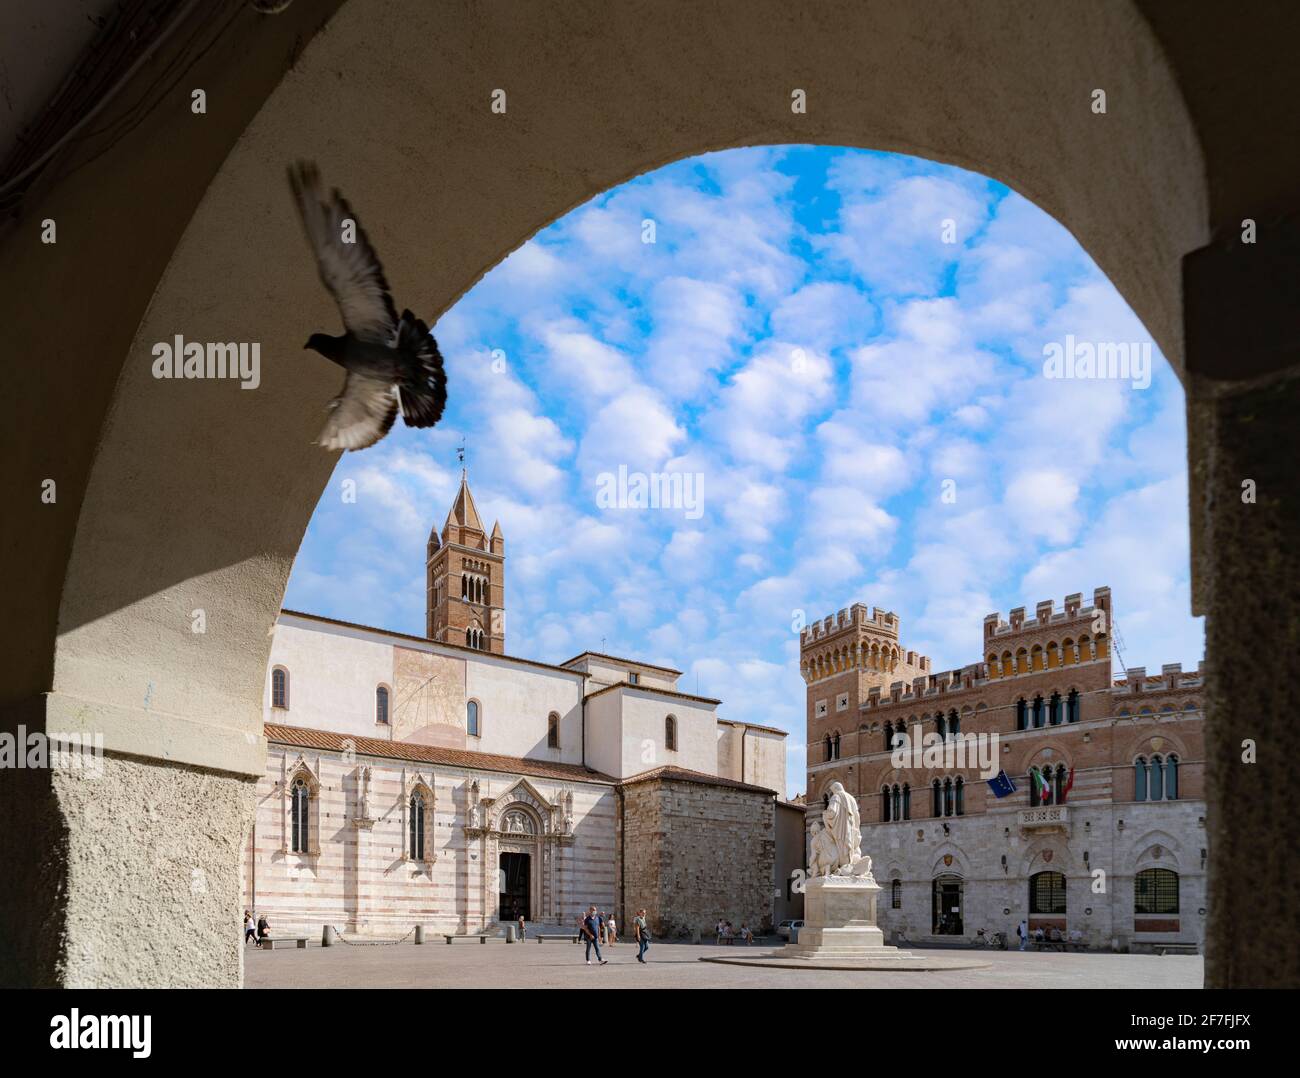 Summer sky over Canapone monument statue and Duomo, Piazza Dante, Grosseto, Tuscany, Italy, Europe Stock Photo